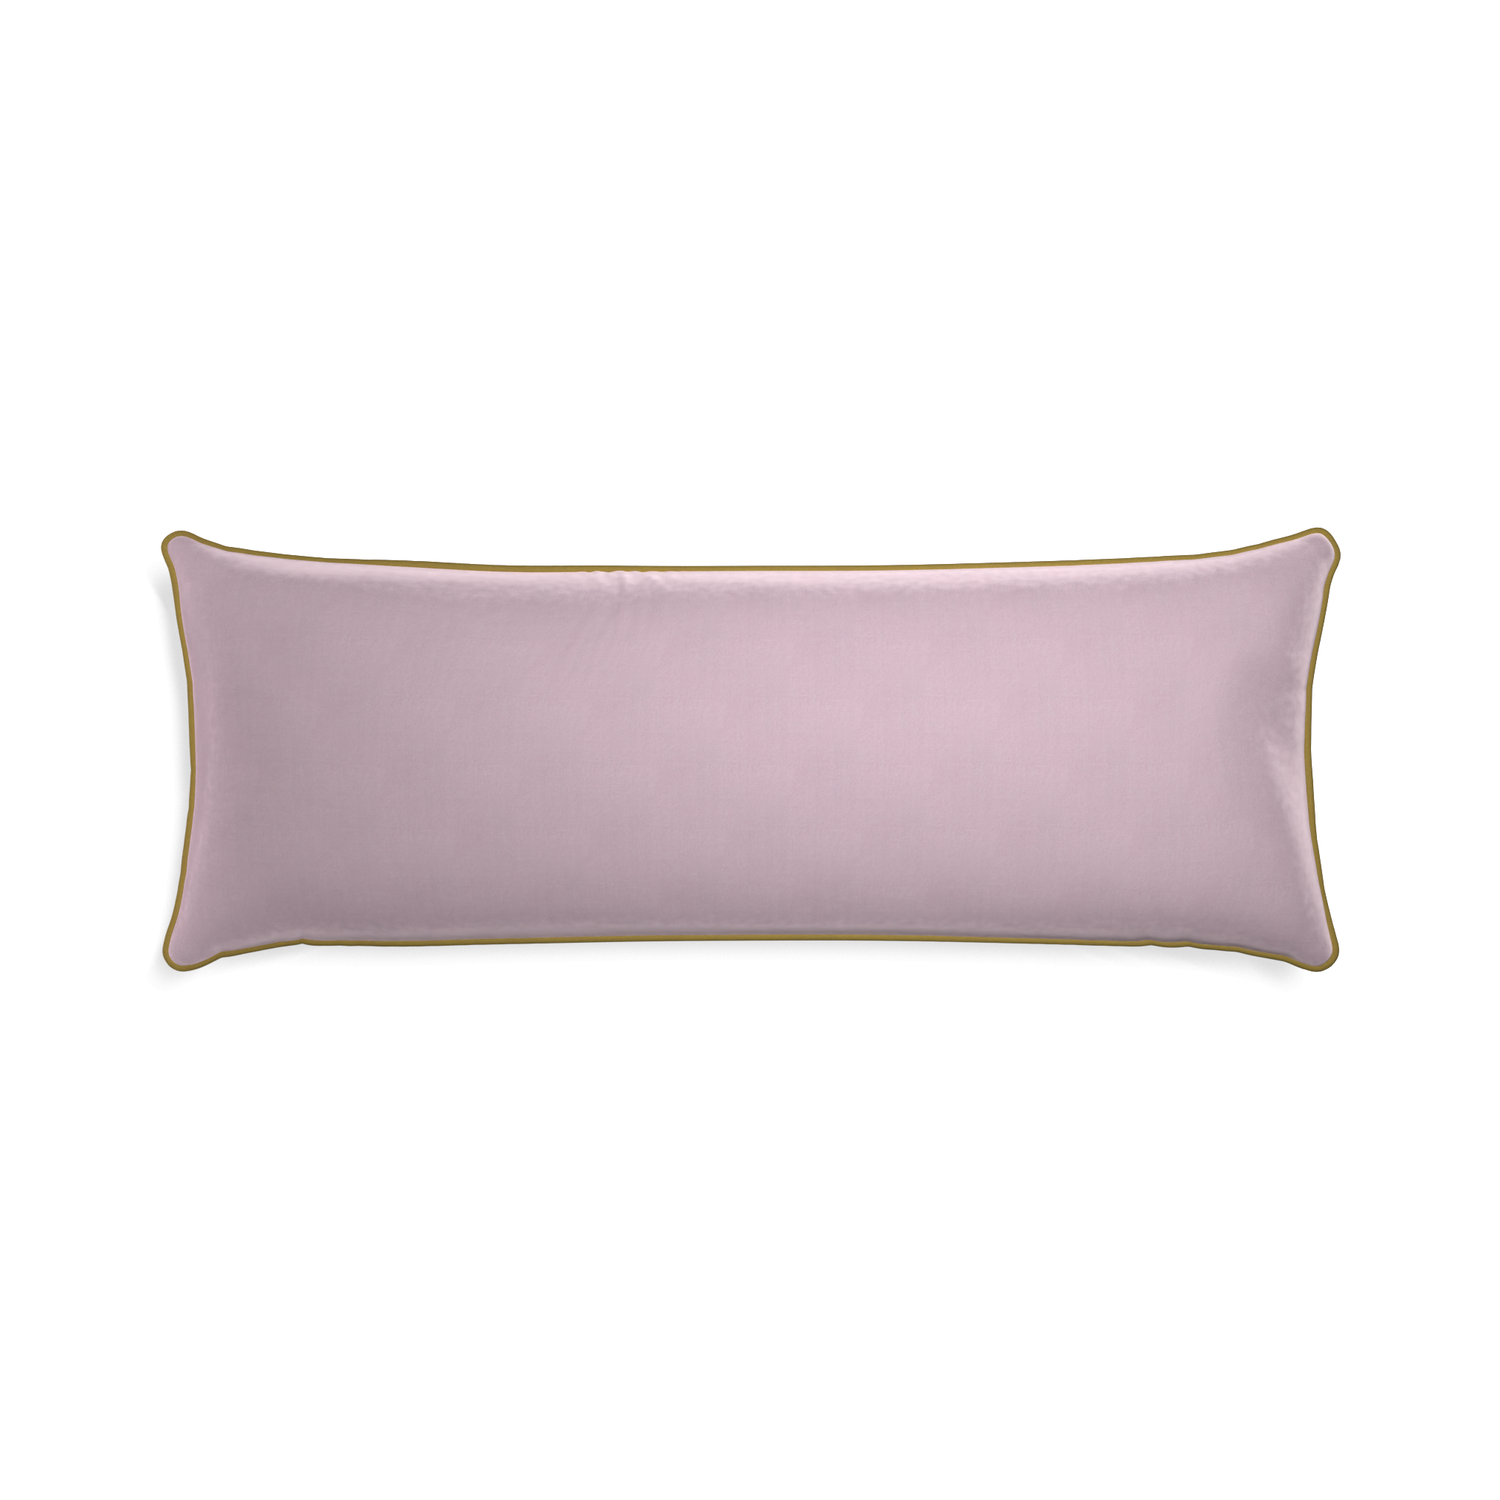 Xl-lumbar lilac velvet custom lilacpillow with c piping on white background